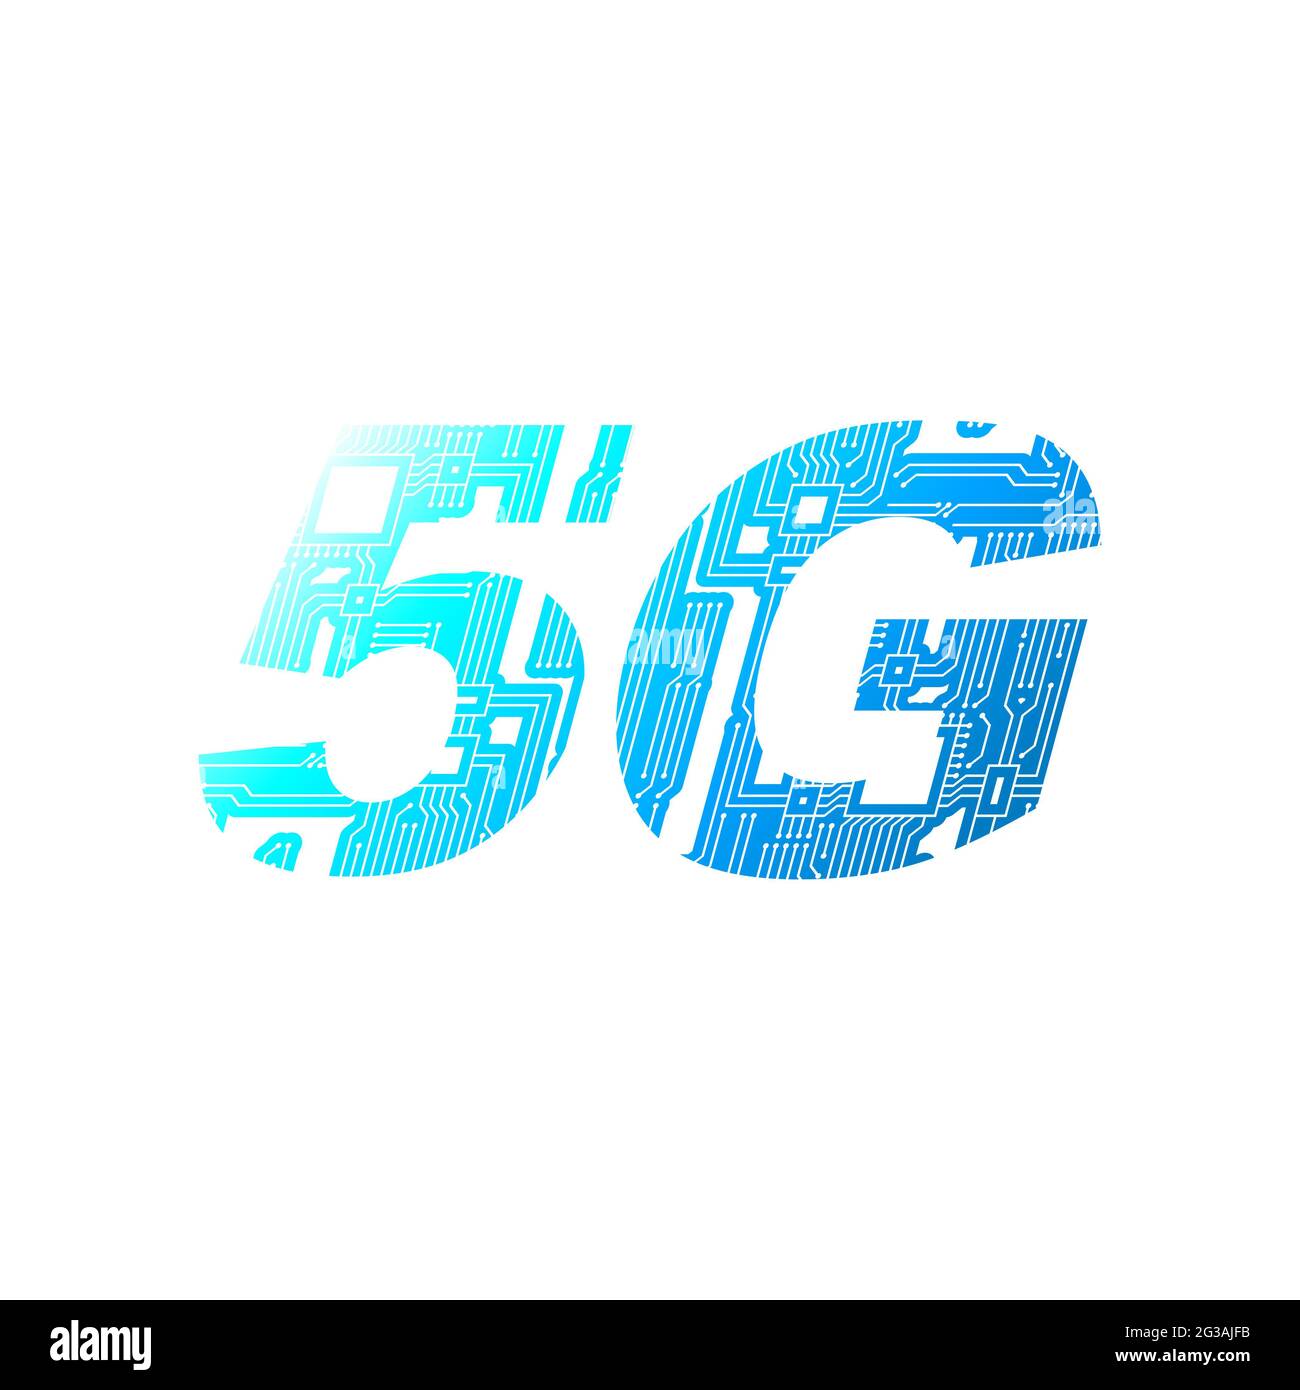 5G mobile networking from circuit board on white background. Stock Photo